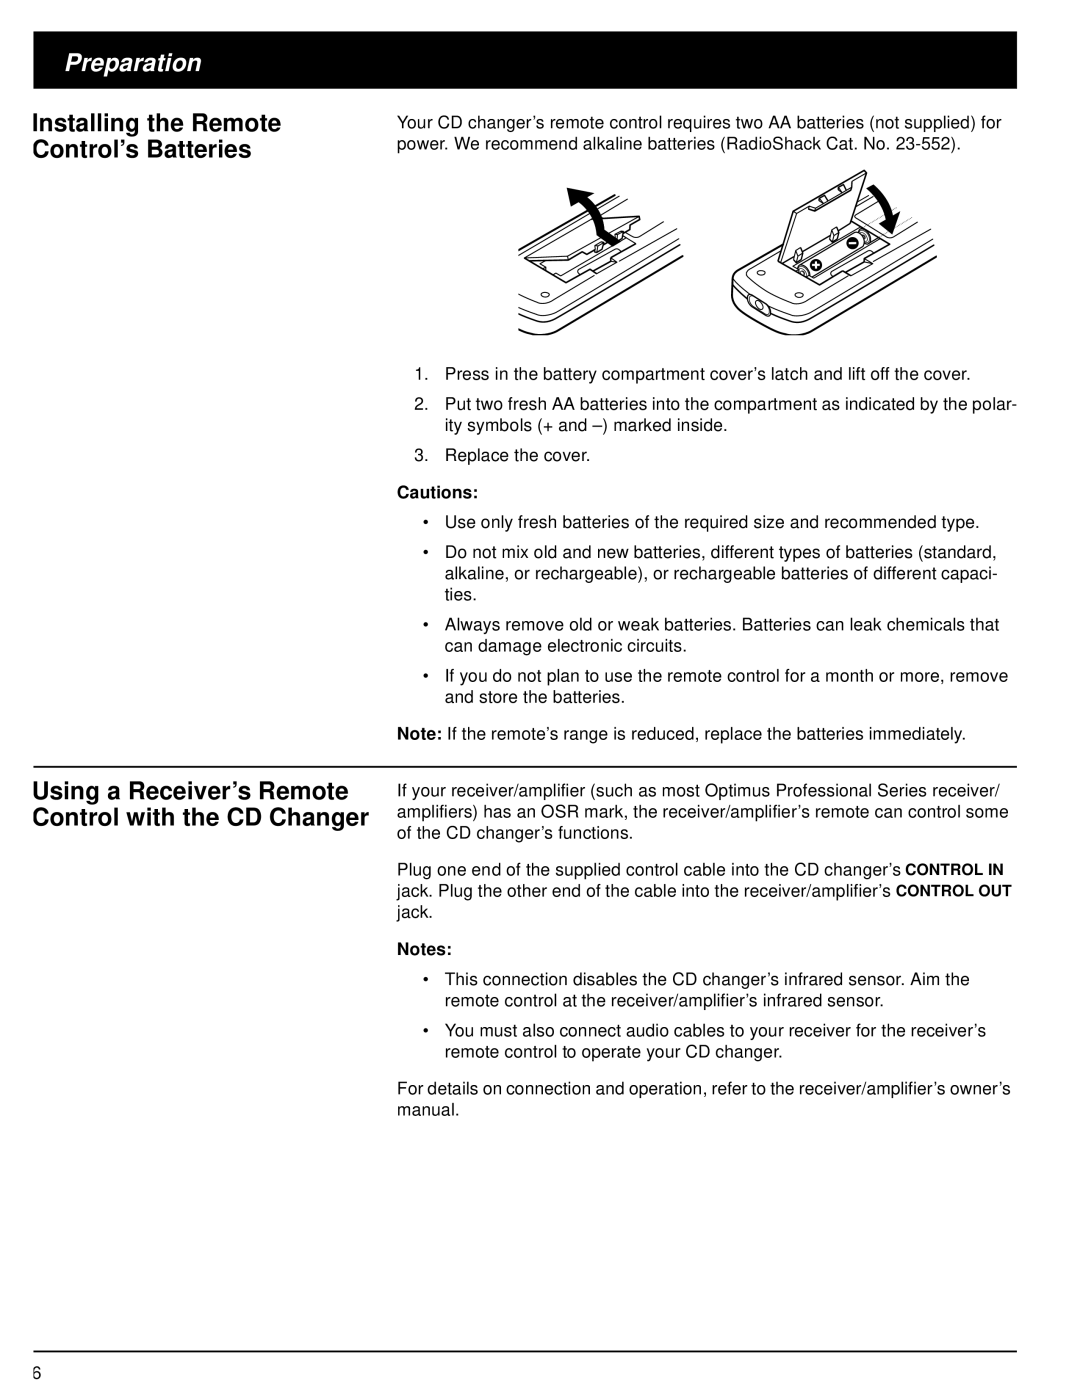 Radio Shack CD-8400 owner manual Preparation, Installing the Remote Control’s Batteries, Cautions 